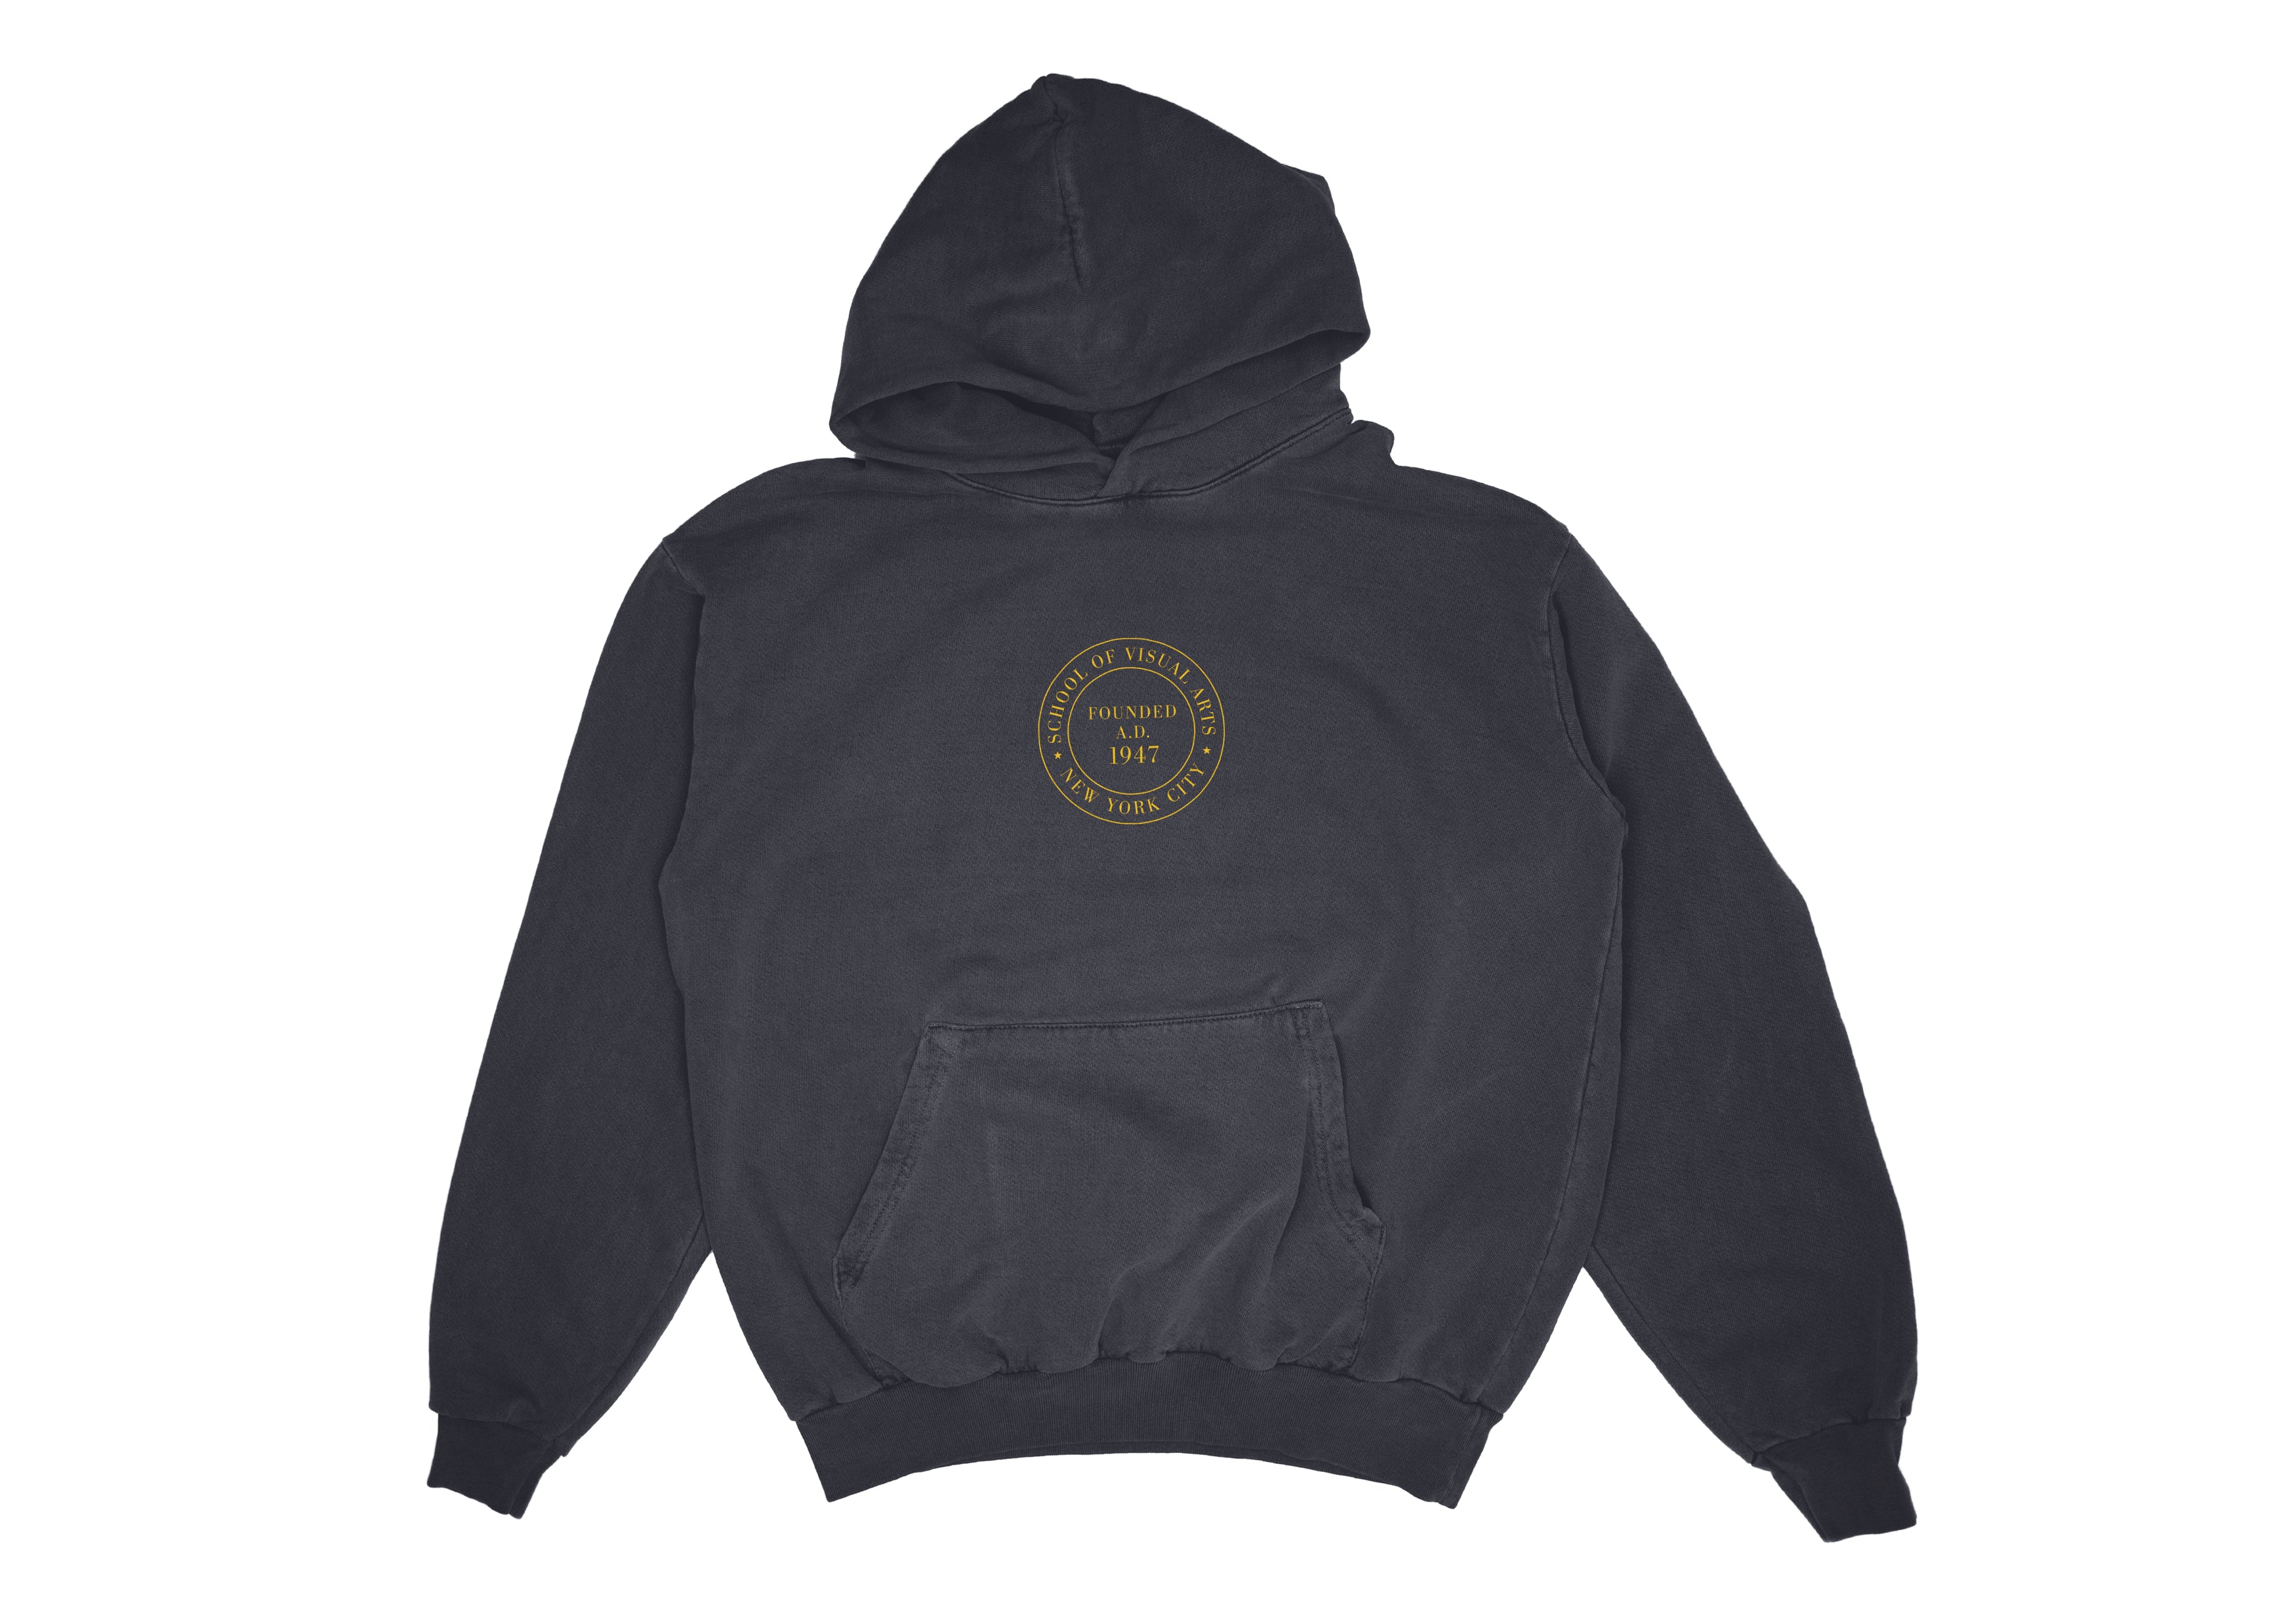 https://svacampusstore.com/cdn/shop/products/af1868802024_APPAREL_PRIMARY__0004_Diploma_20Seal_20Hoodie_20-_20Dolphin_20Blue_20_2B_20Yellow.jpg?v=1710342295&width=3500